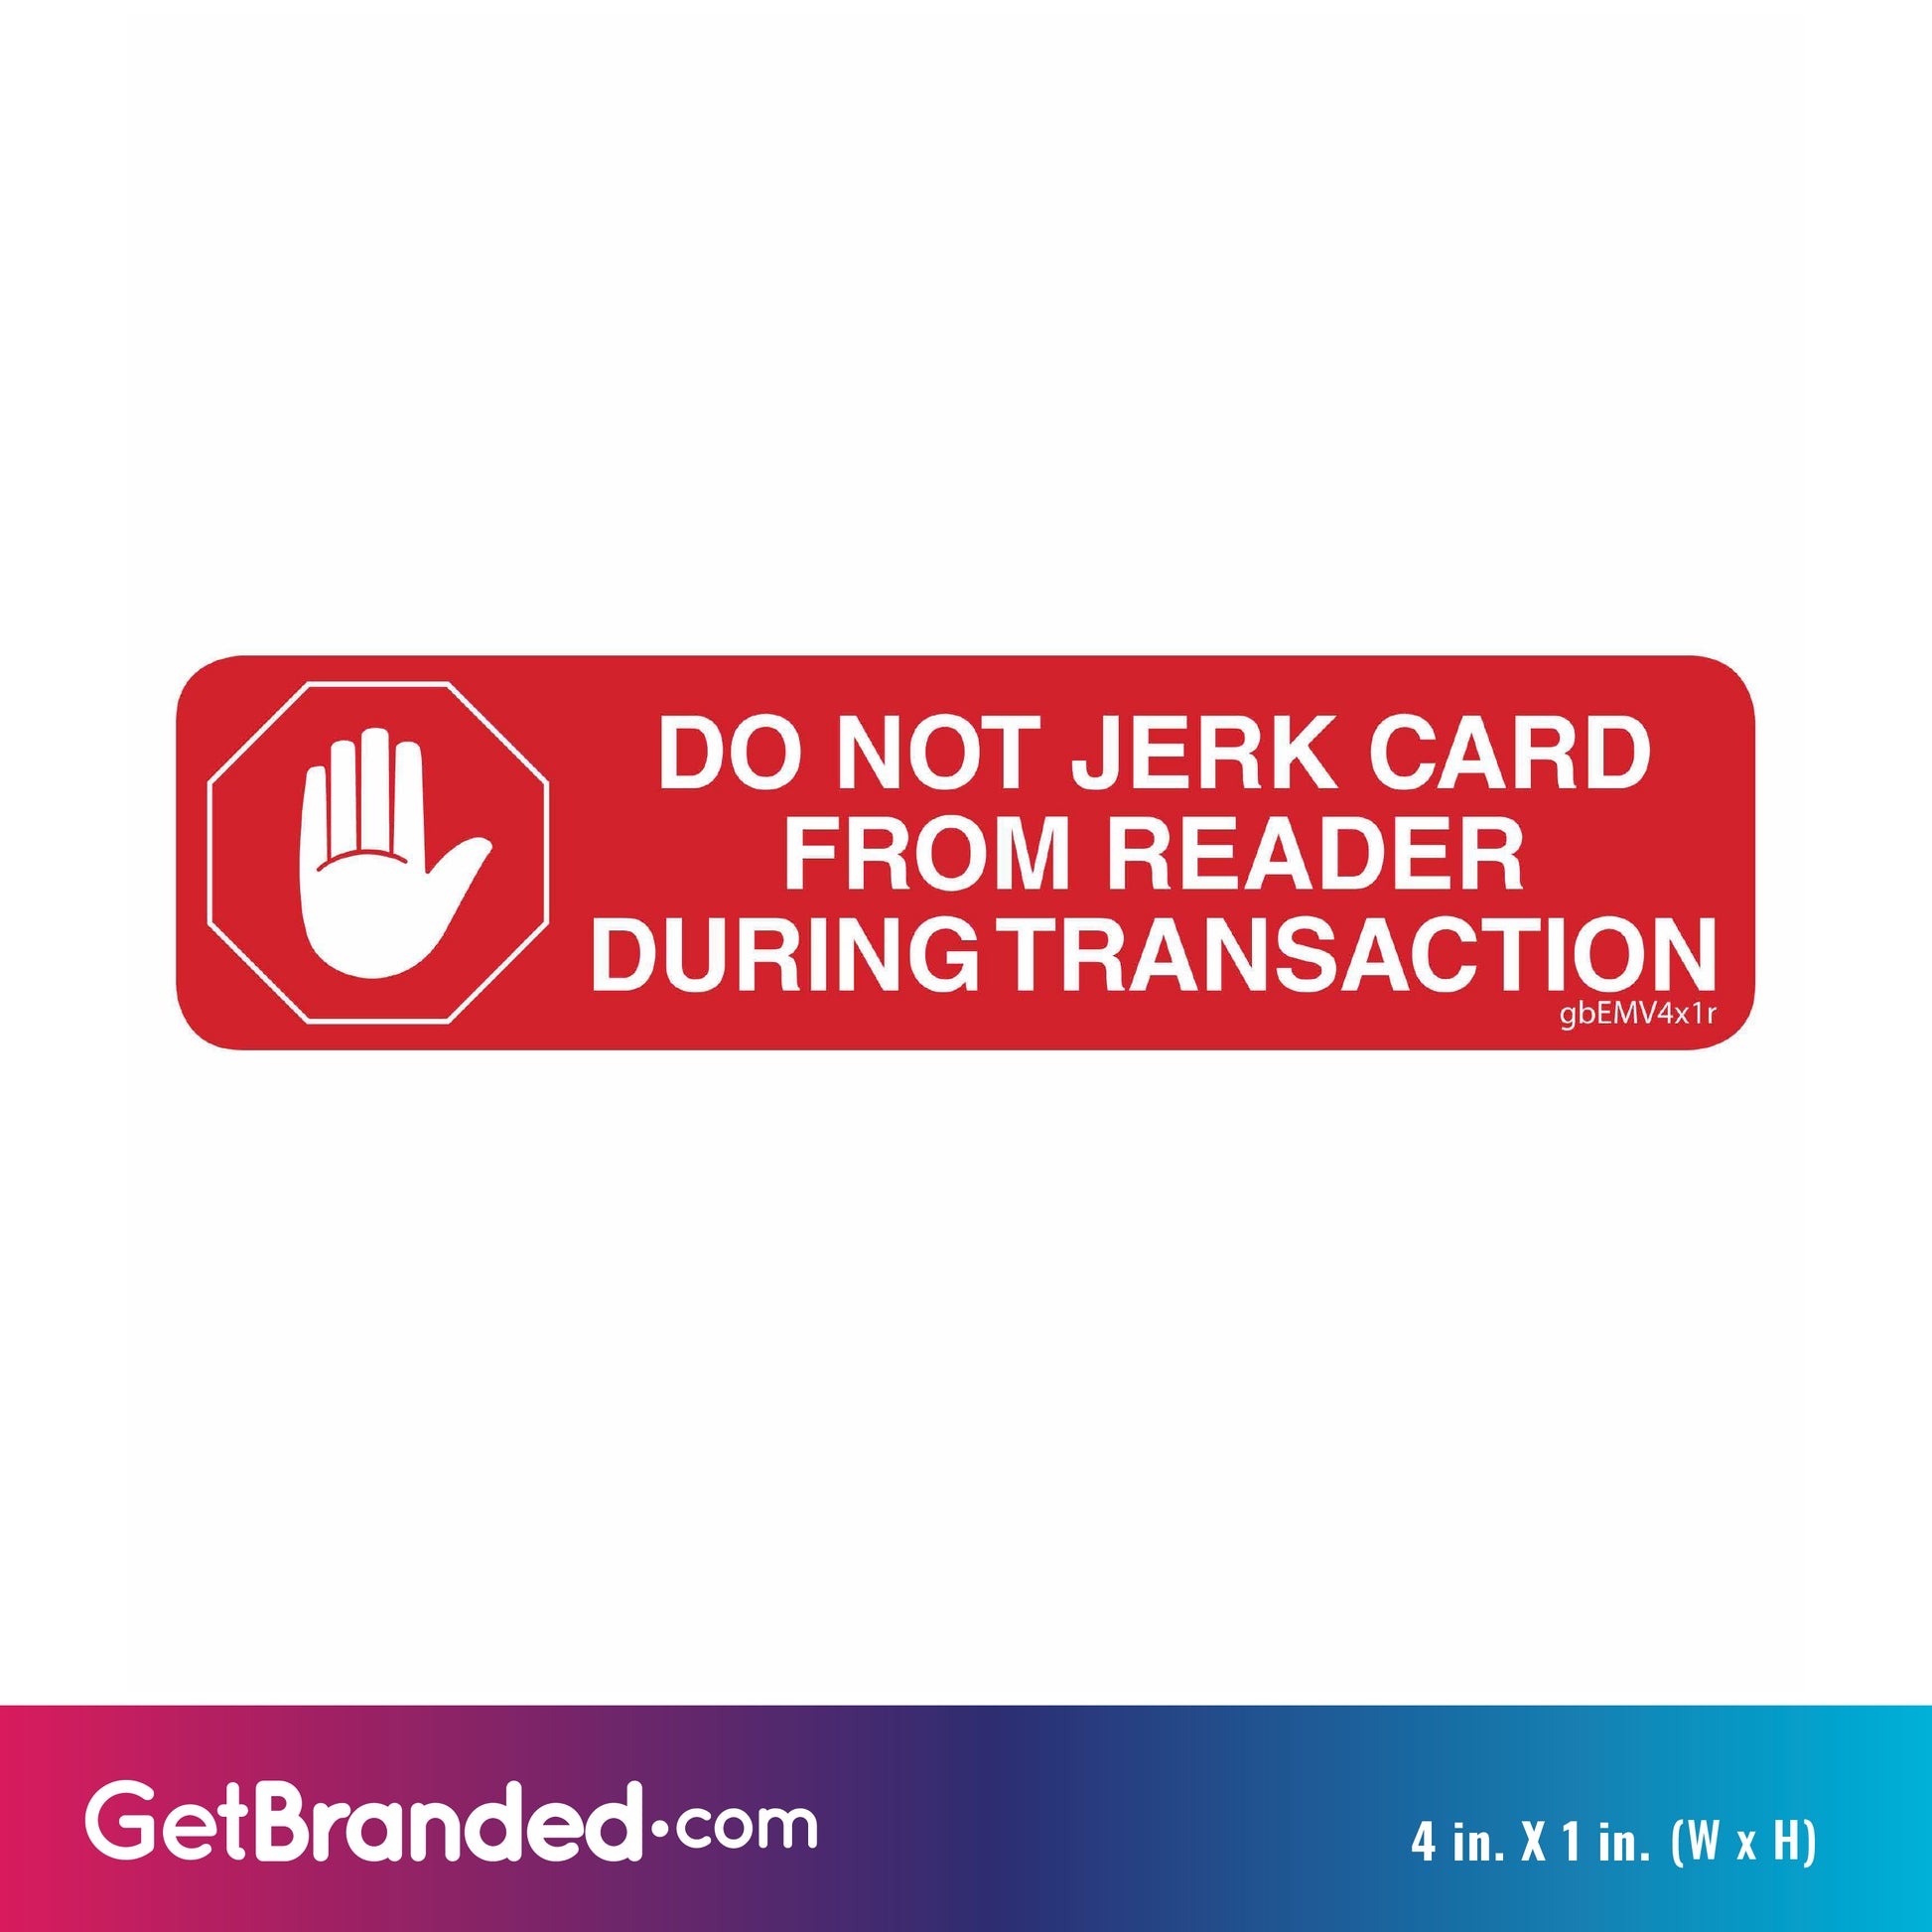 Stop Do Not Jerk Card Decal size guide.